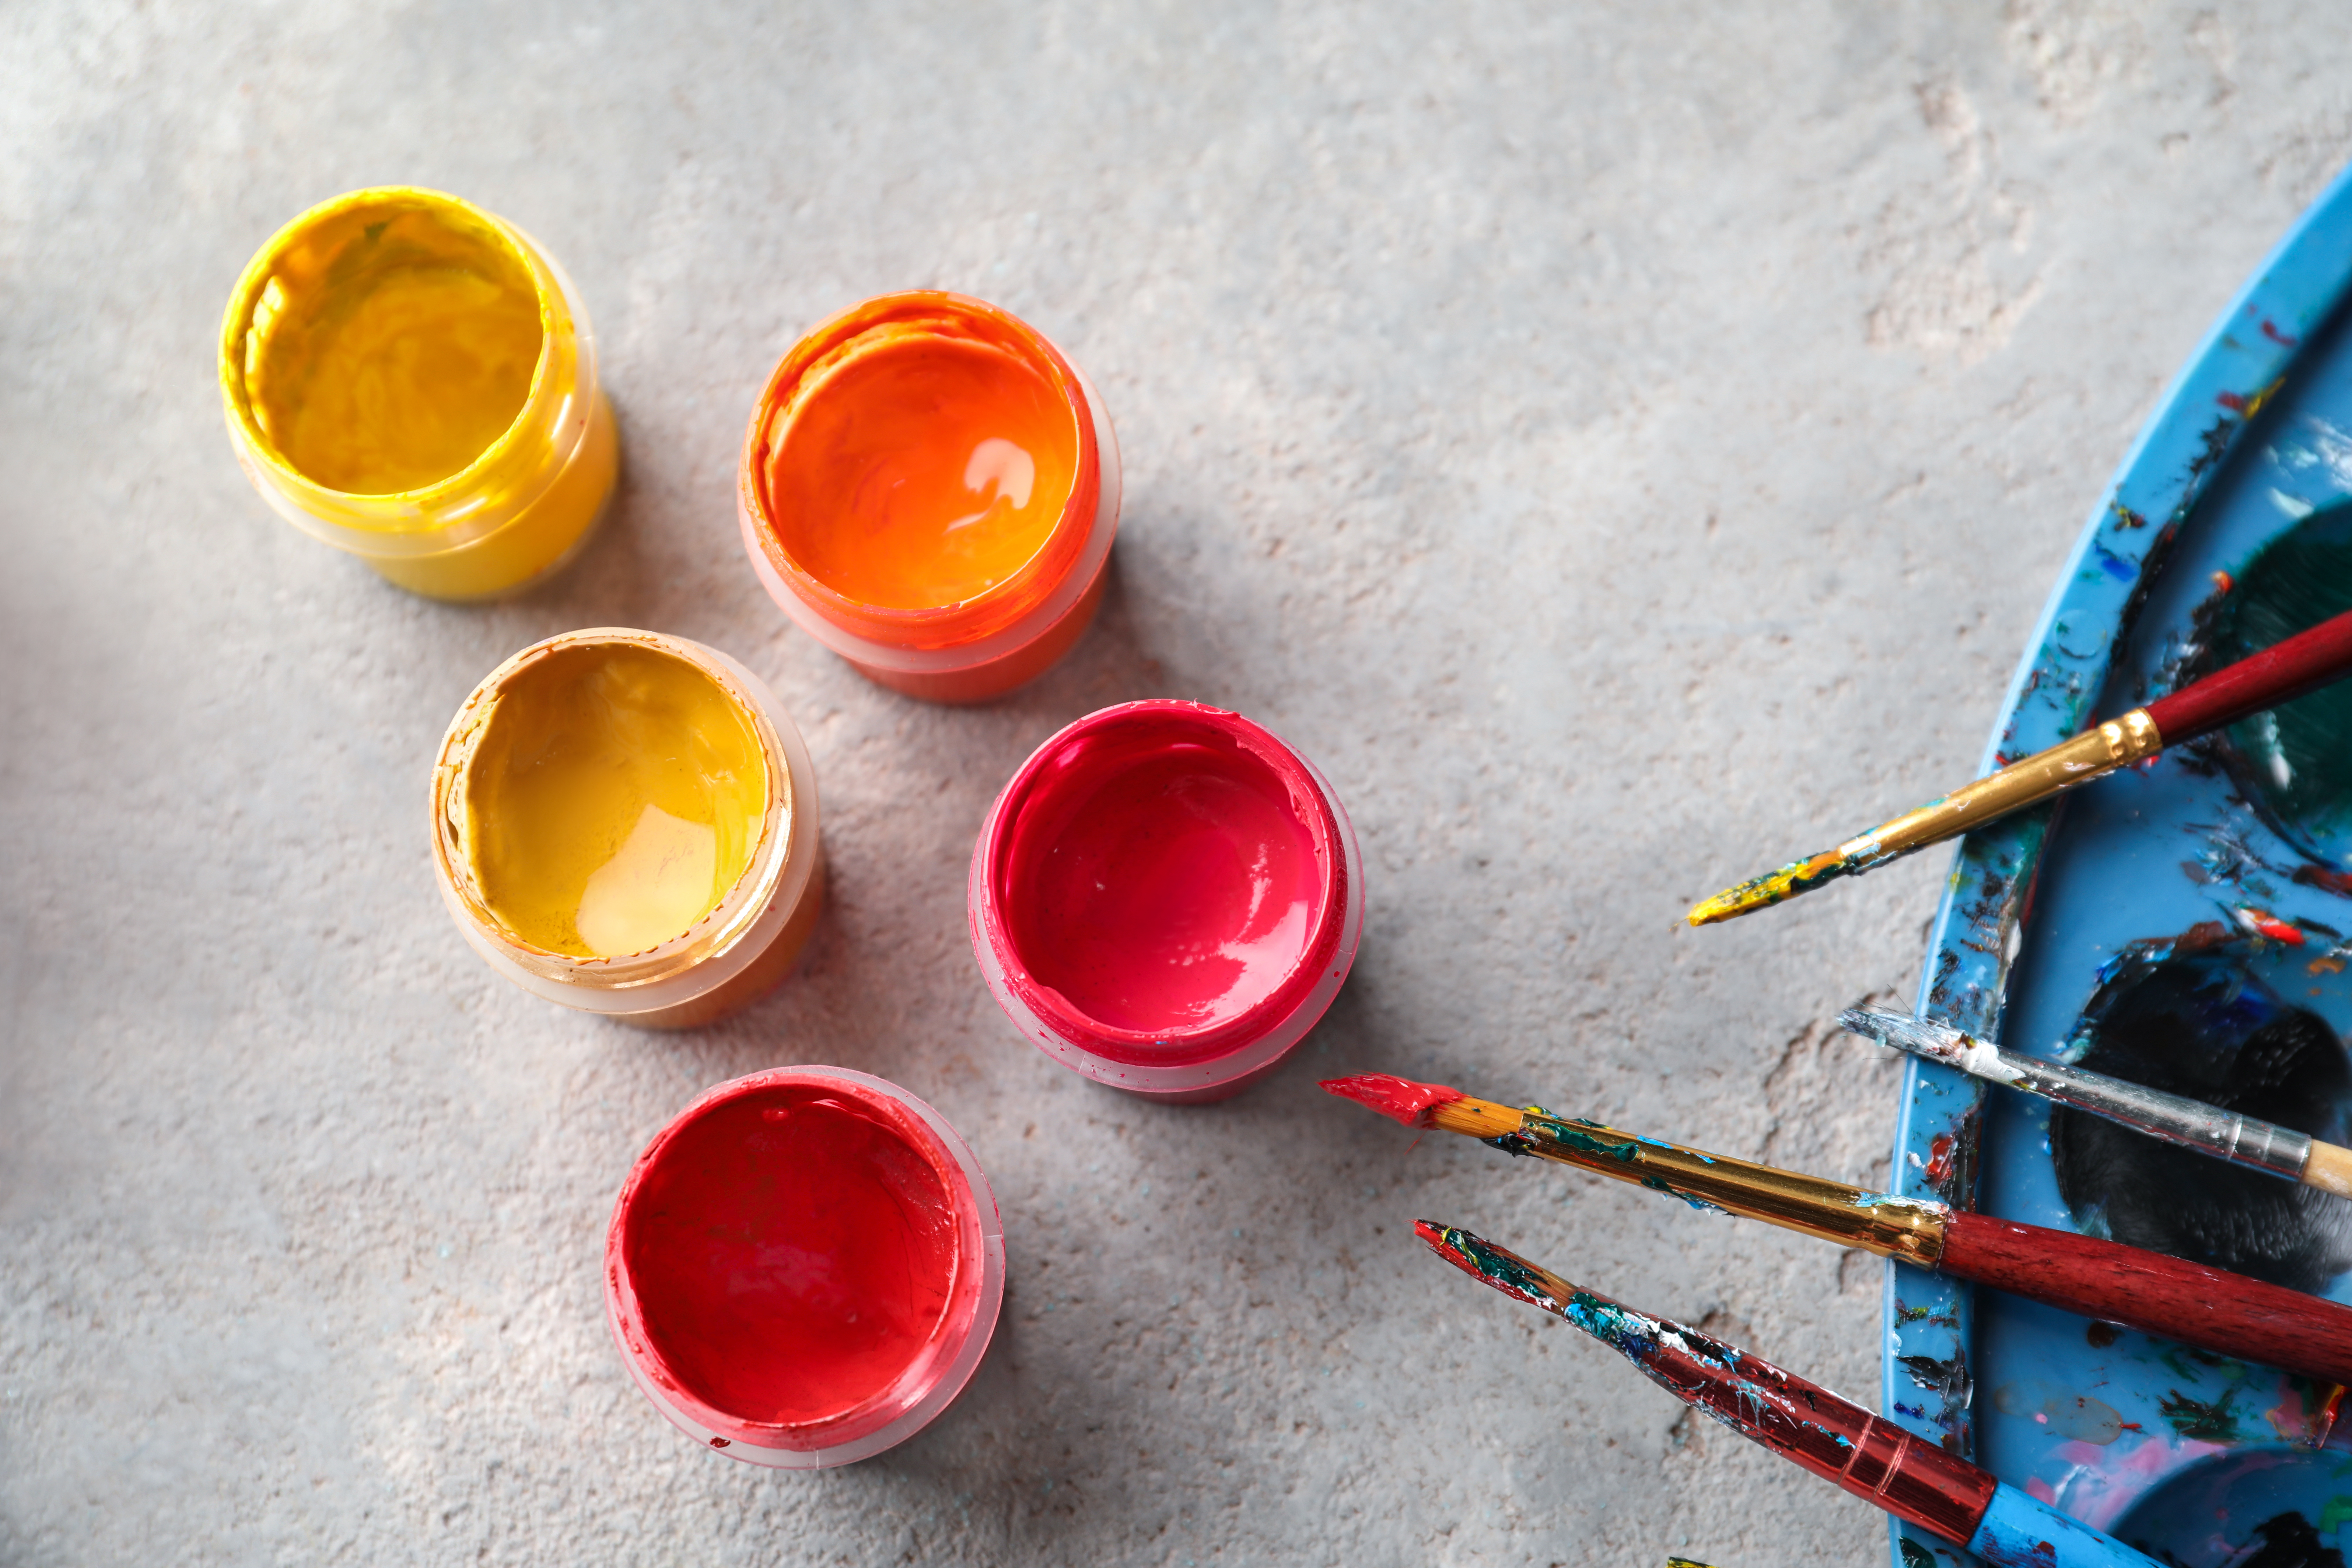 Types of Oils for Painting and the Best Oils for You